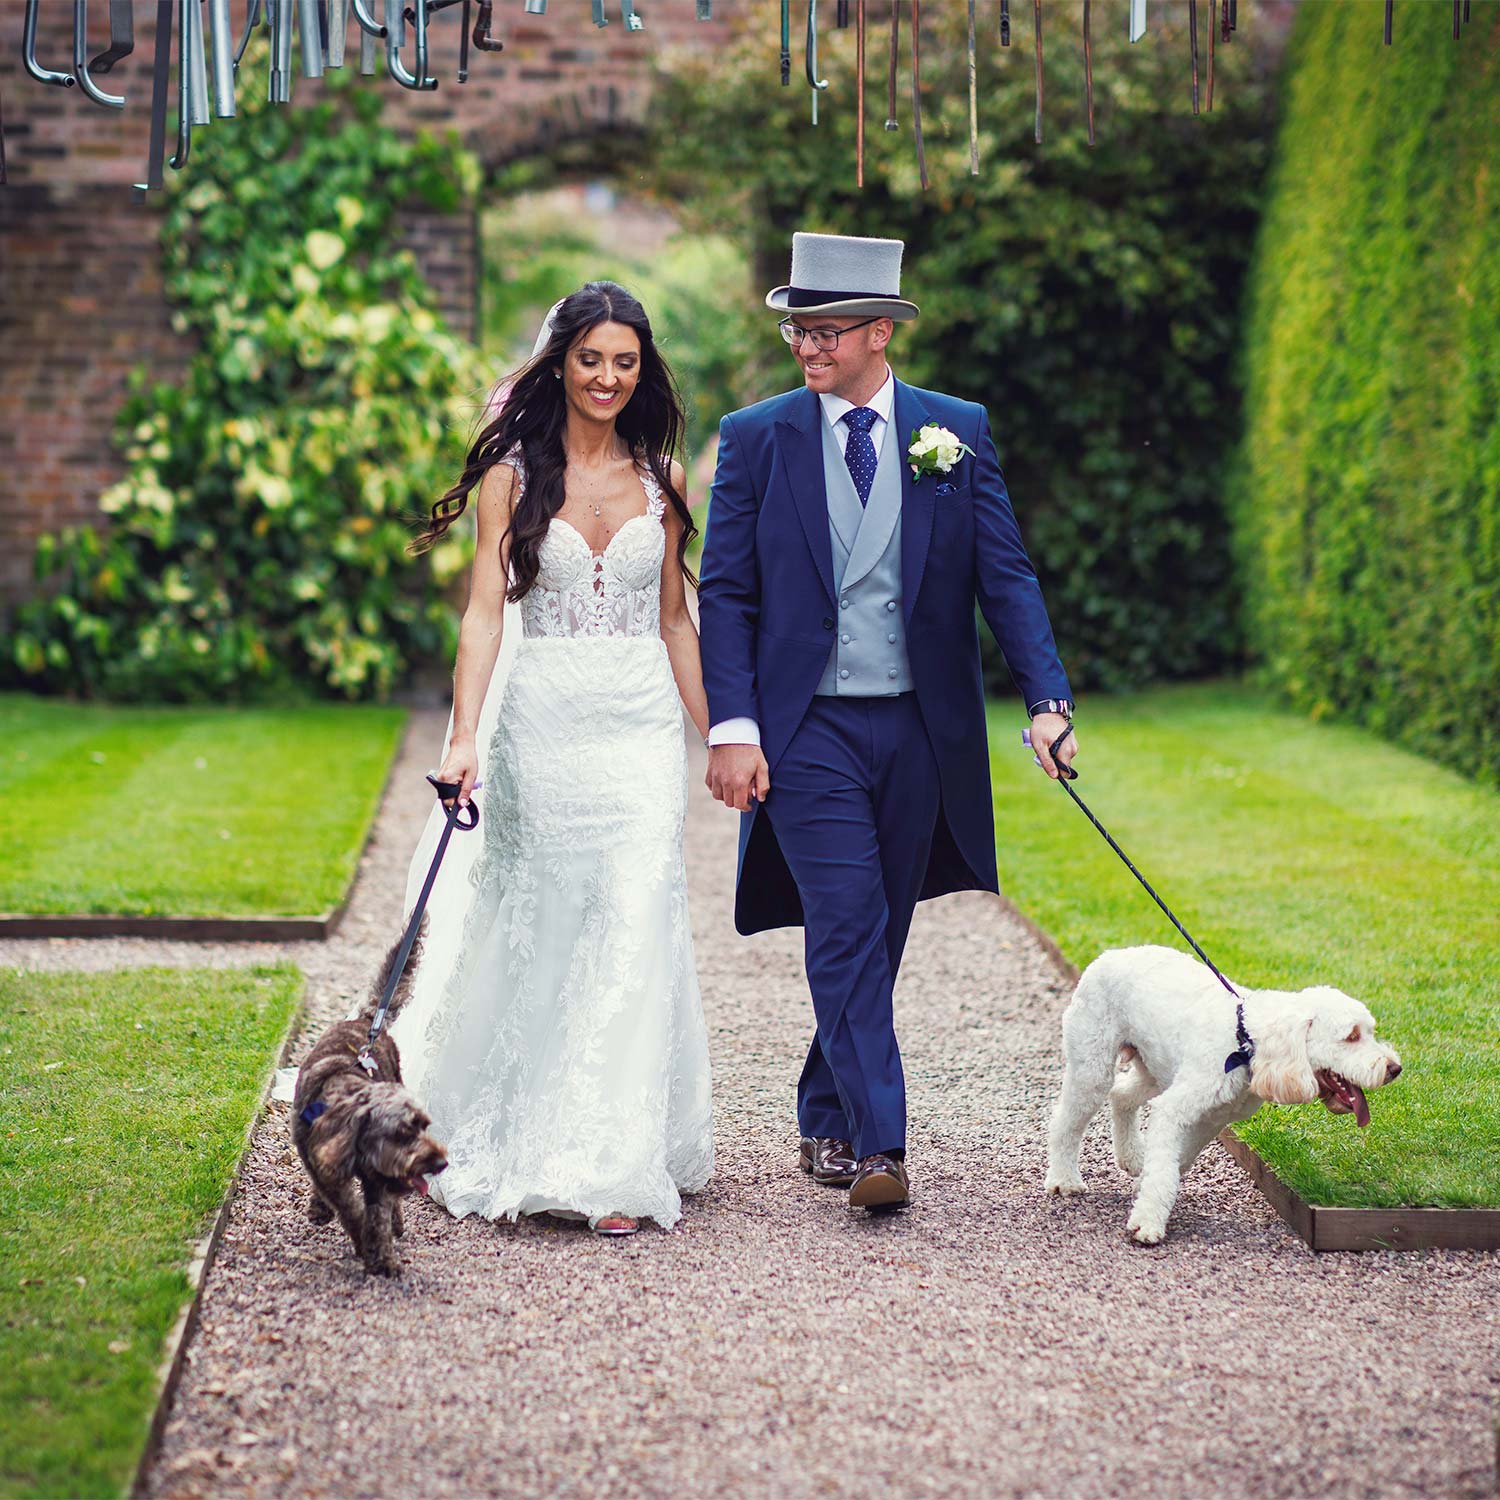 Bride and groom walking down a path holding their two dogs on leads